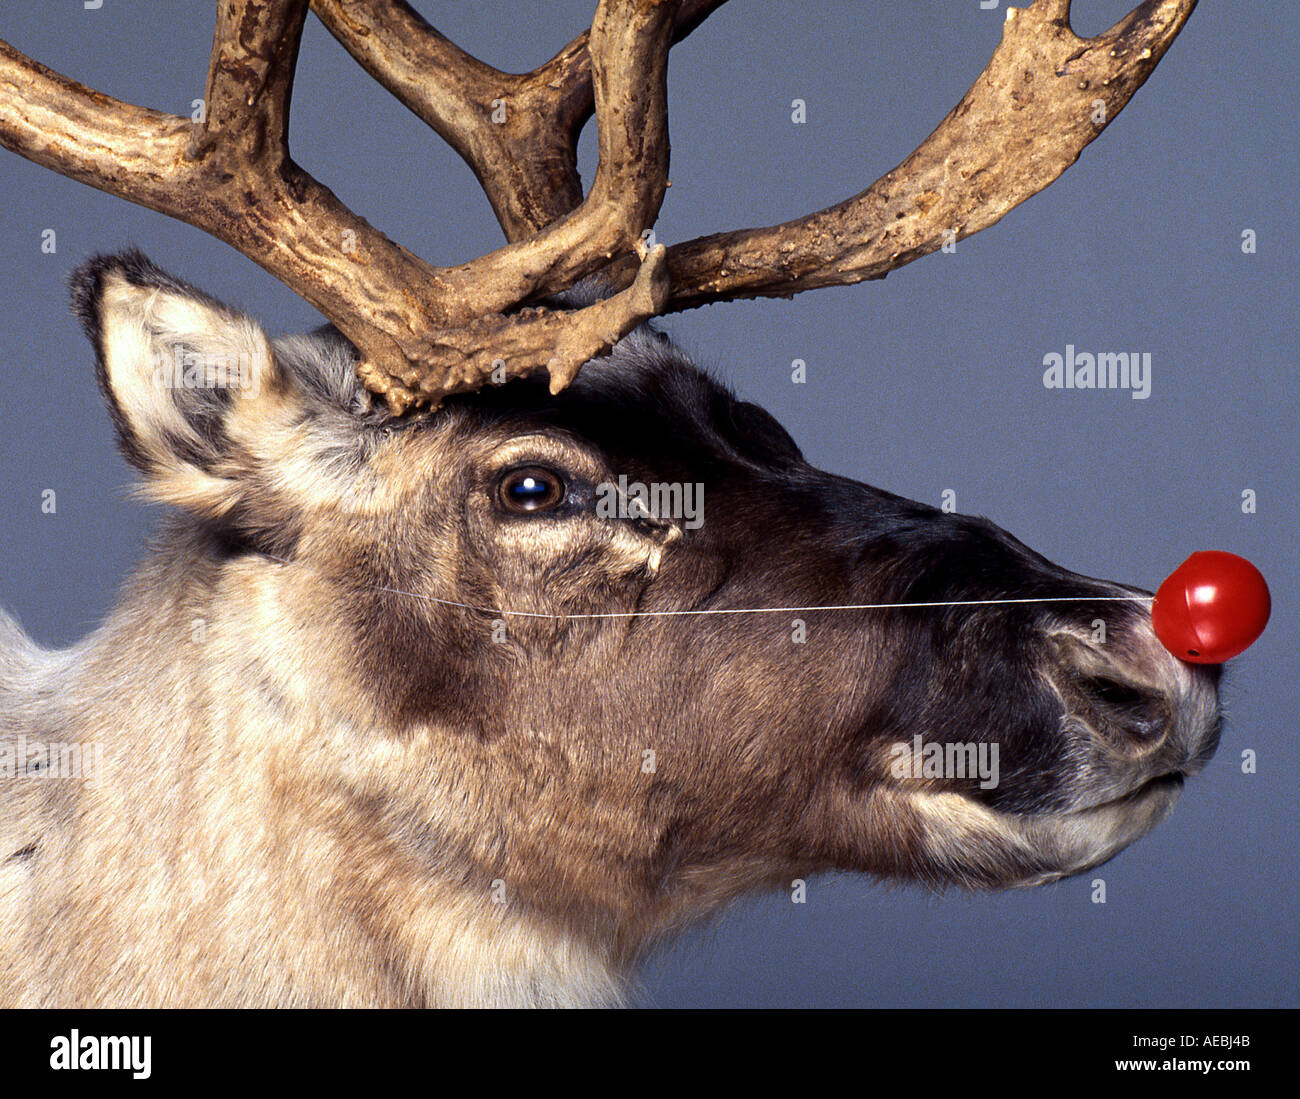 Reindeer picture by Paddy McGuinness Stock Photo